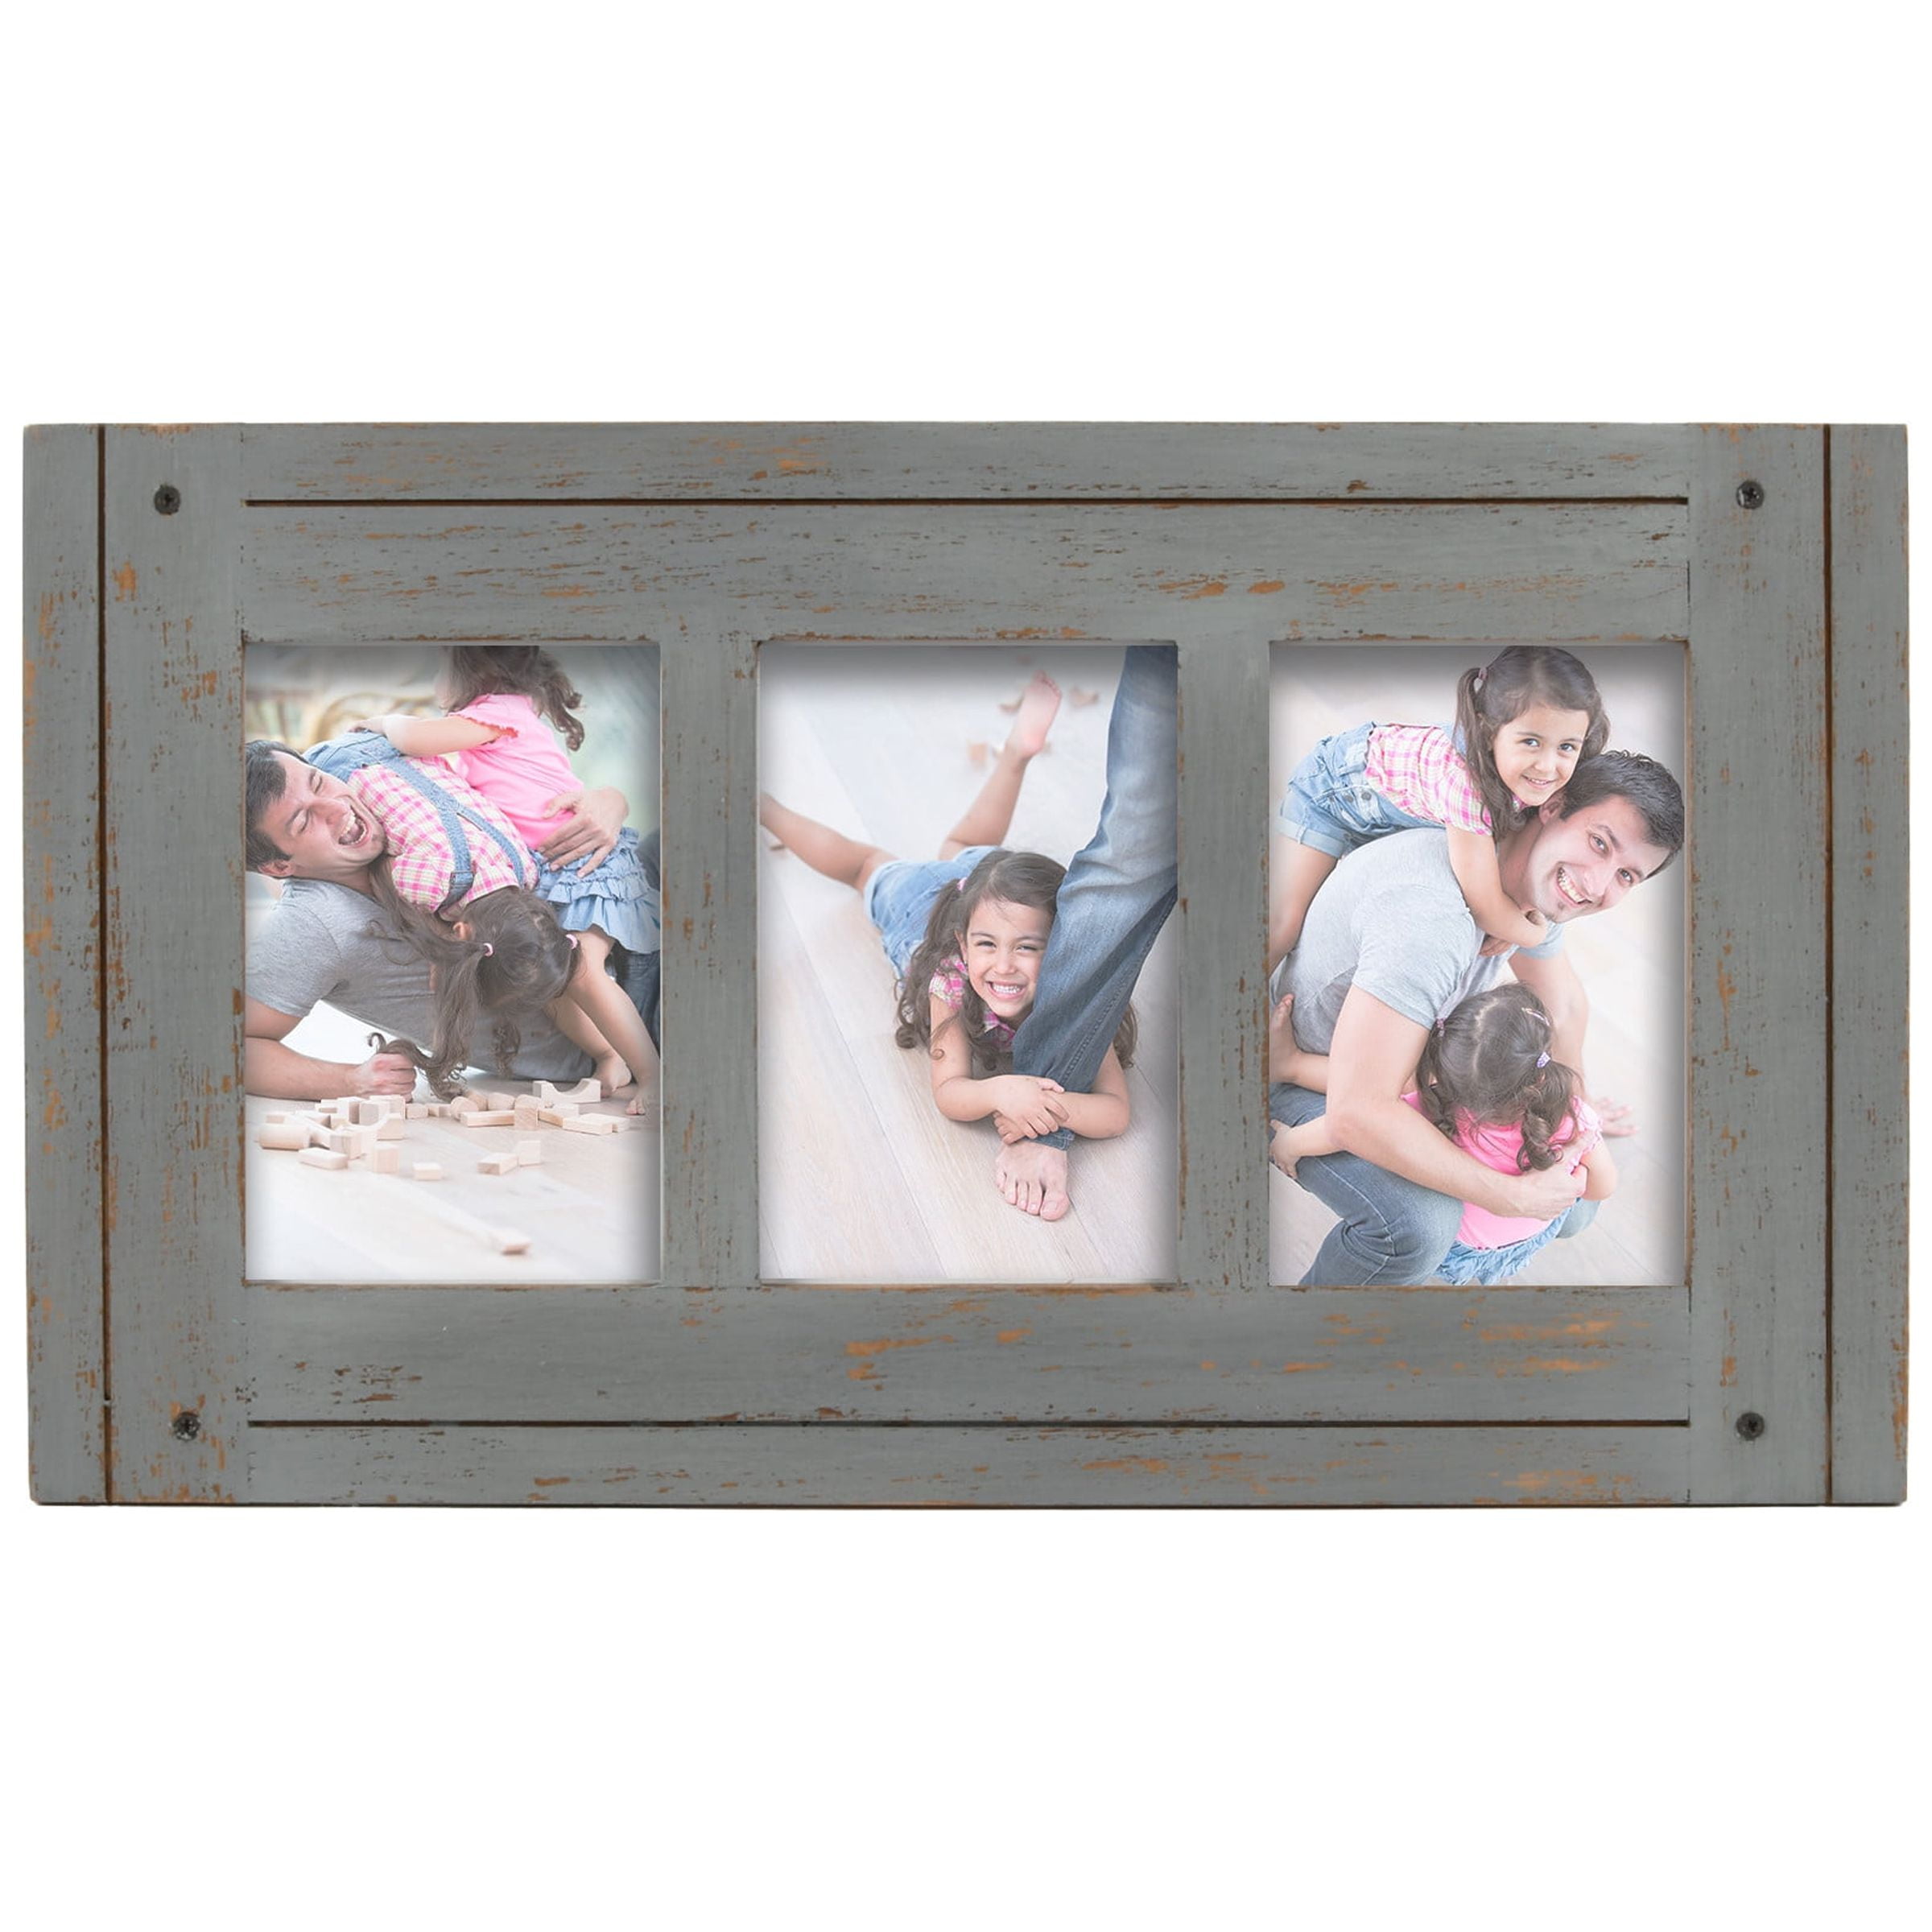  Sonefreiy 4x6 Picture Frame Collage 3 Picture Frames with Real  Glass, Grey Wood Foldable Photo Frames for Wall & Tabletop Display, Gift  for Mom Dad Family Friends